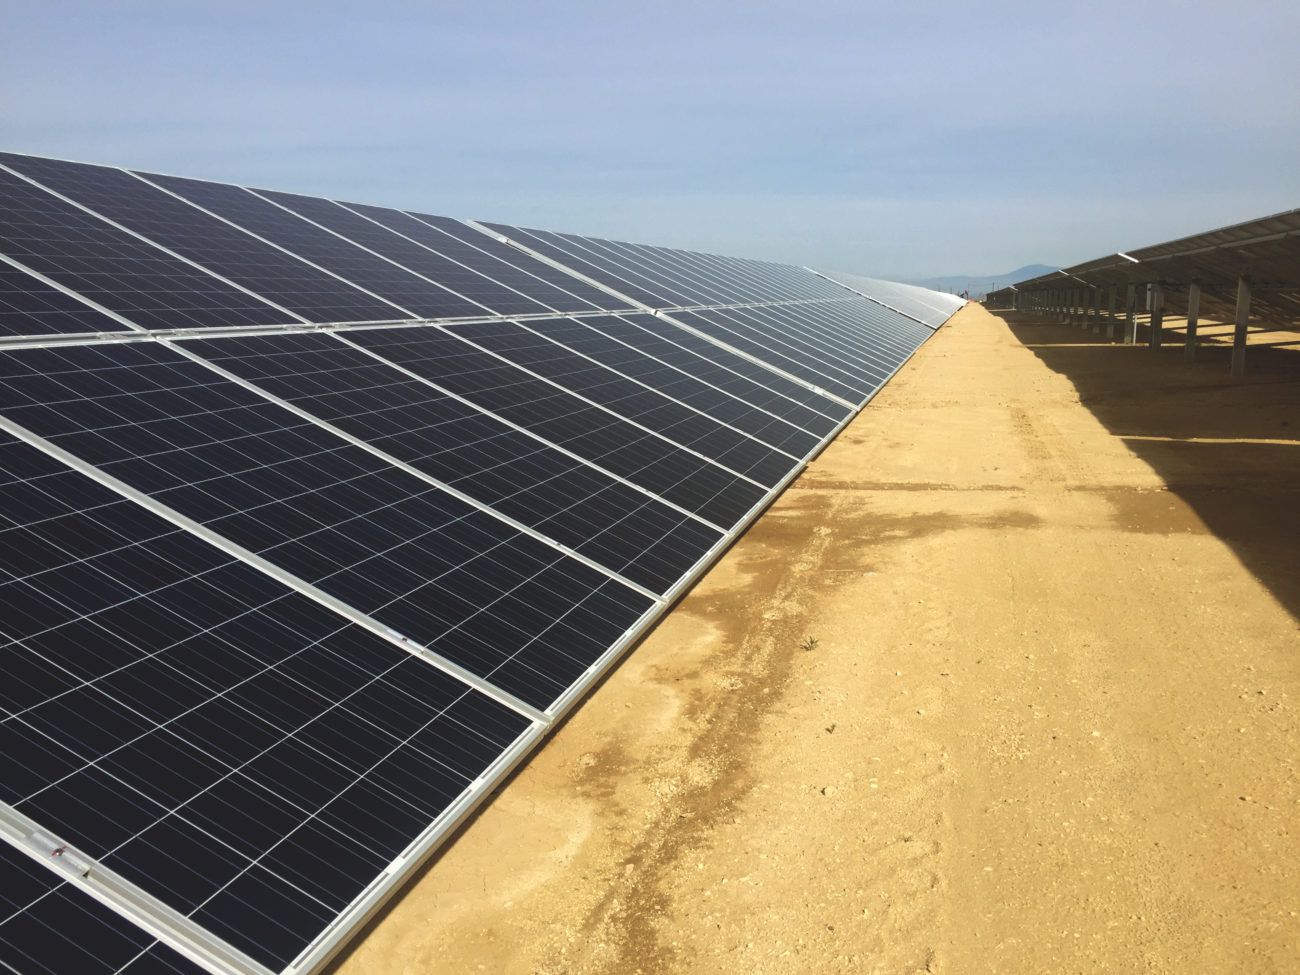 Seneca Resources Corporation Reduces Carbon Footprint with 3.1 MW Solar System at their Oil Field in Kern County, California